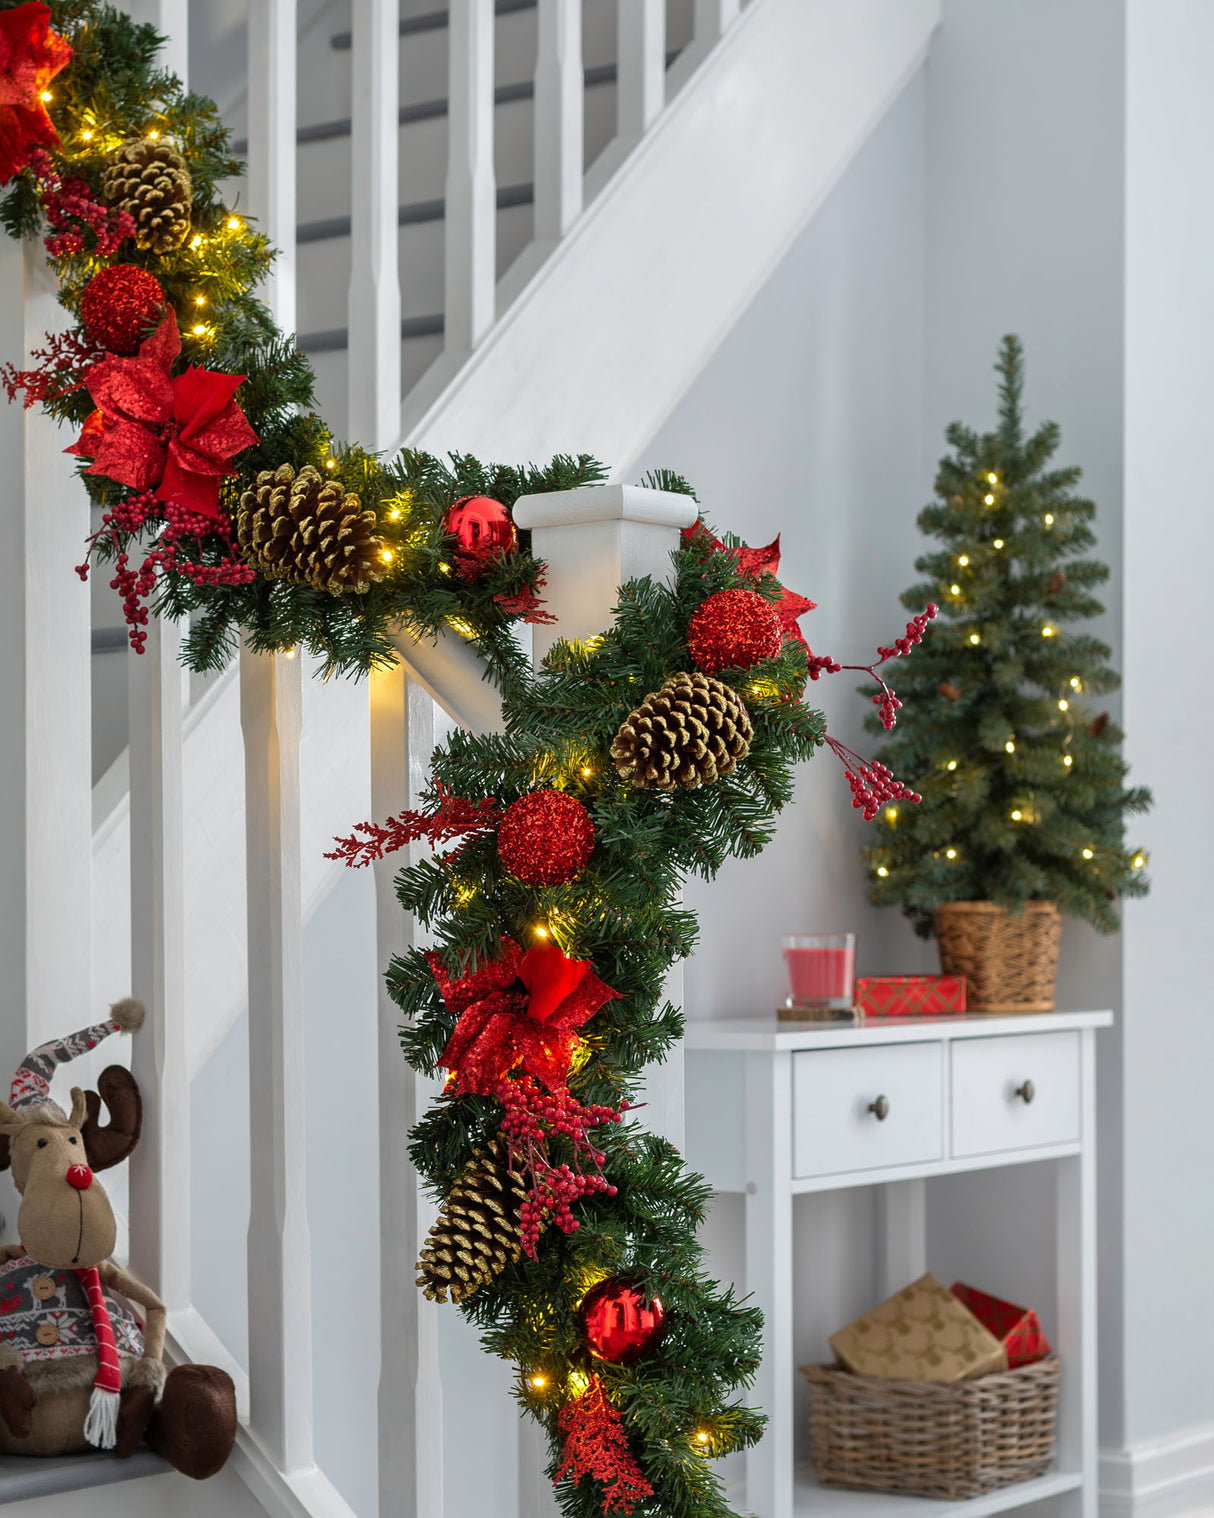 Pre-Lit Red Decorated Extra Thick Garland, 9 ft